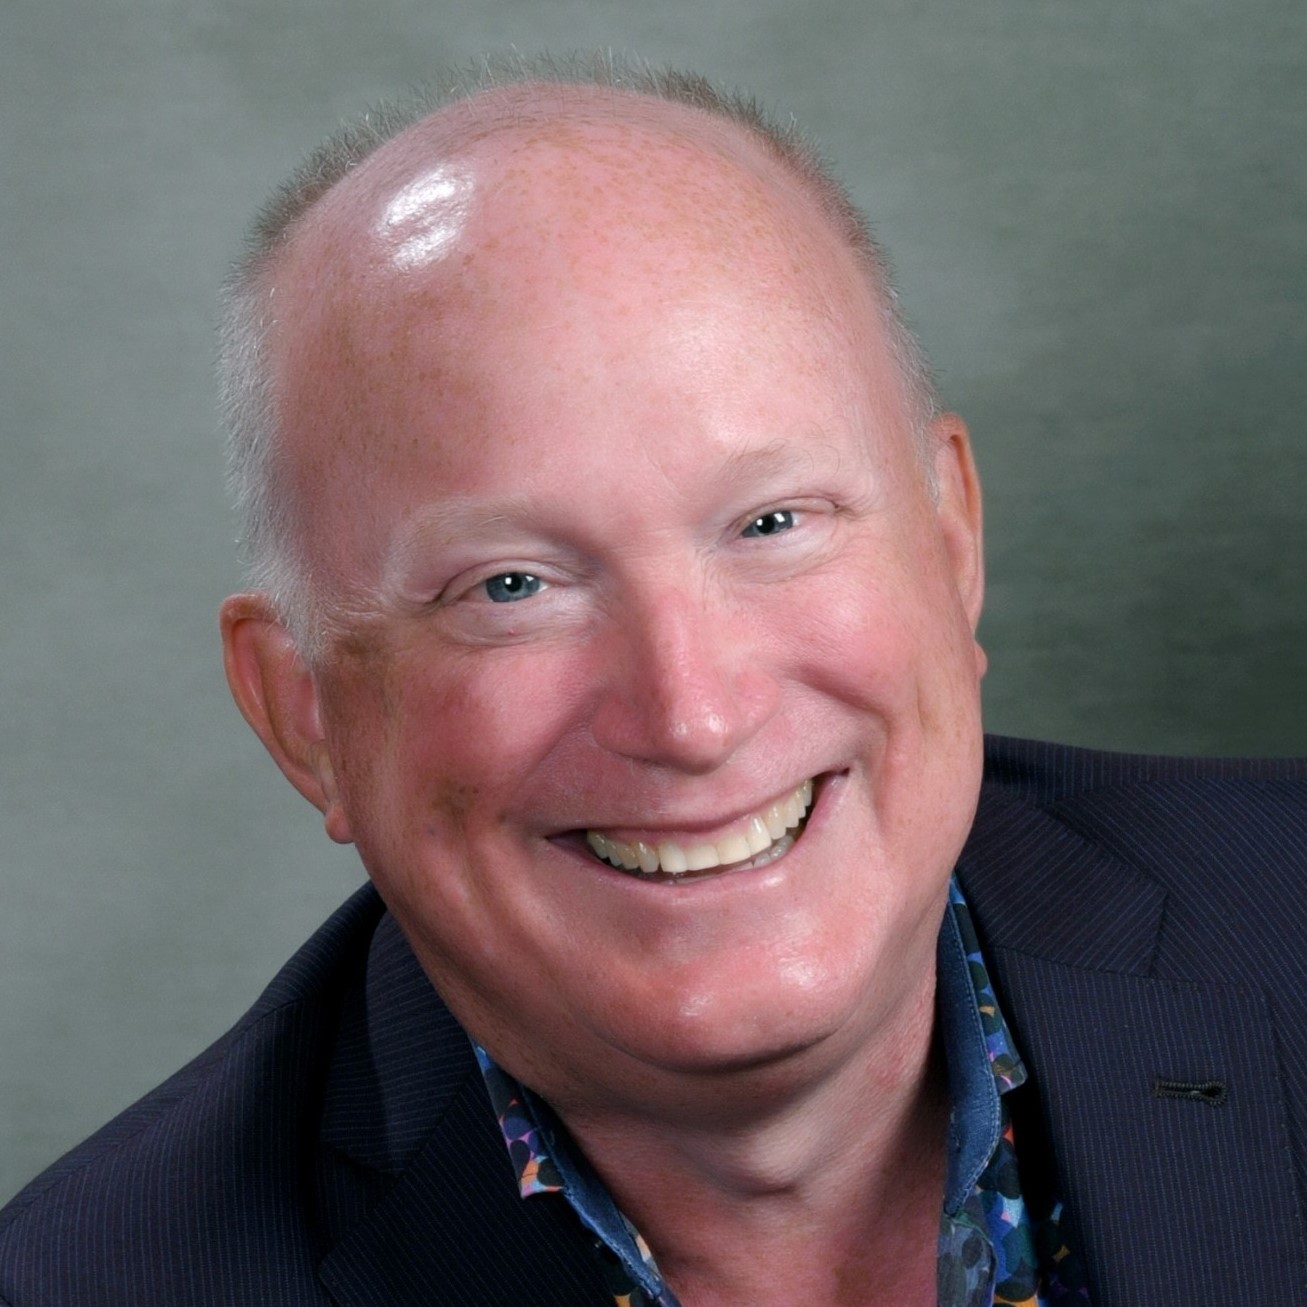 Headshot of Michael Jones, CEO of SK Arts. Older while male hearing navy blue jacket and navy blue patterned short smiling broadly.